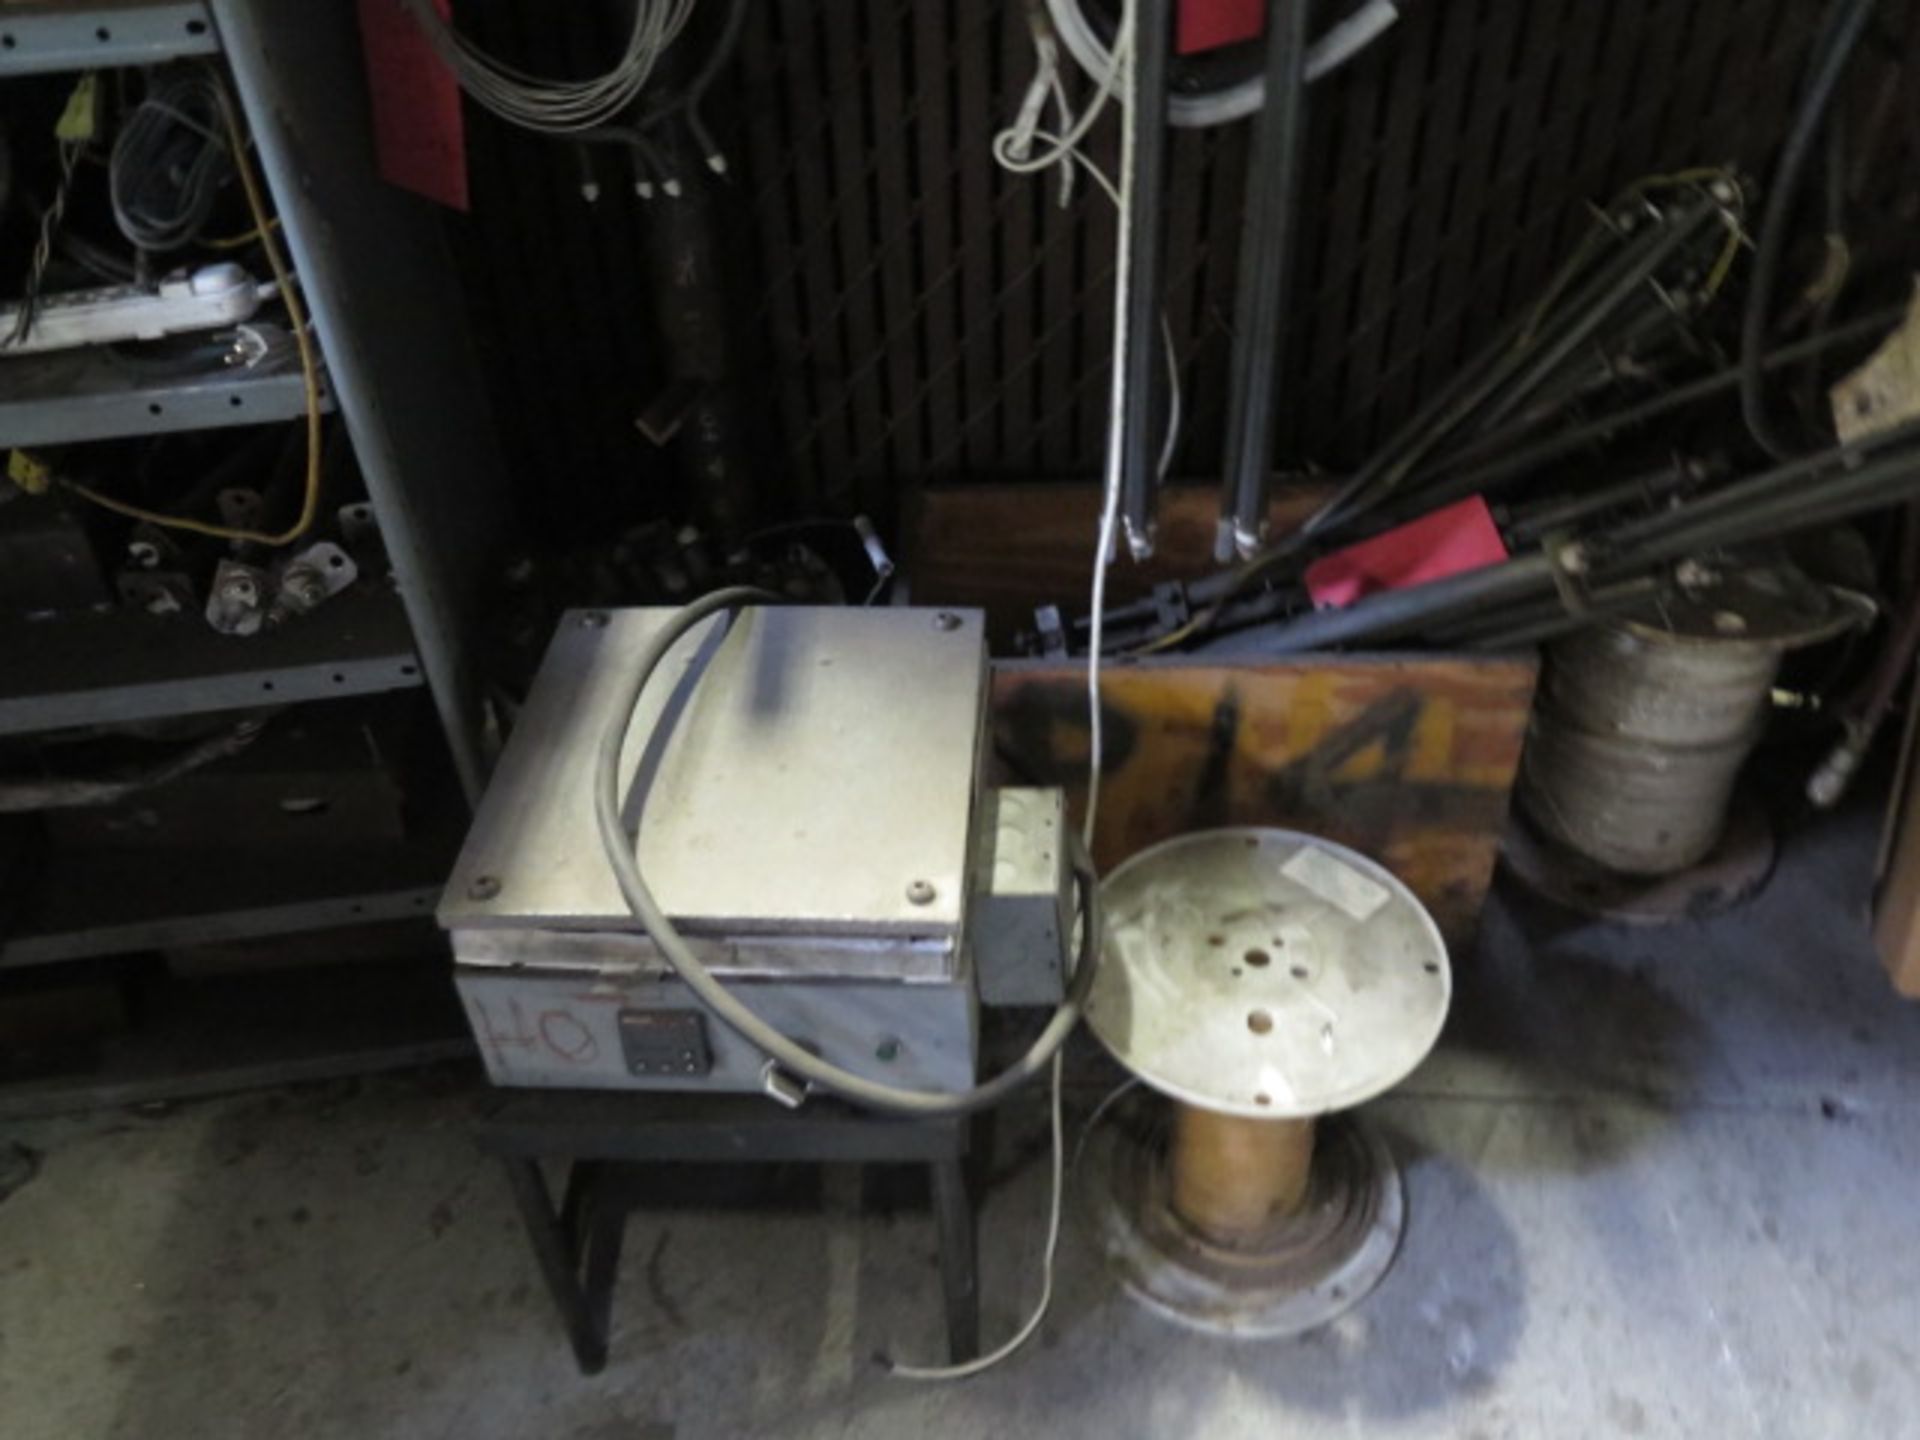 Heater Elements and Supplies, 5" Bench Vise w/ Steel Work Bench and Misc (SOLD AS-IS - NO WARRANTY) - Image 4 of 8